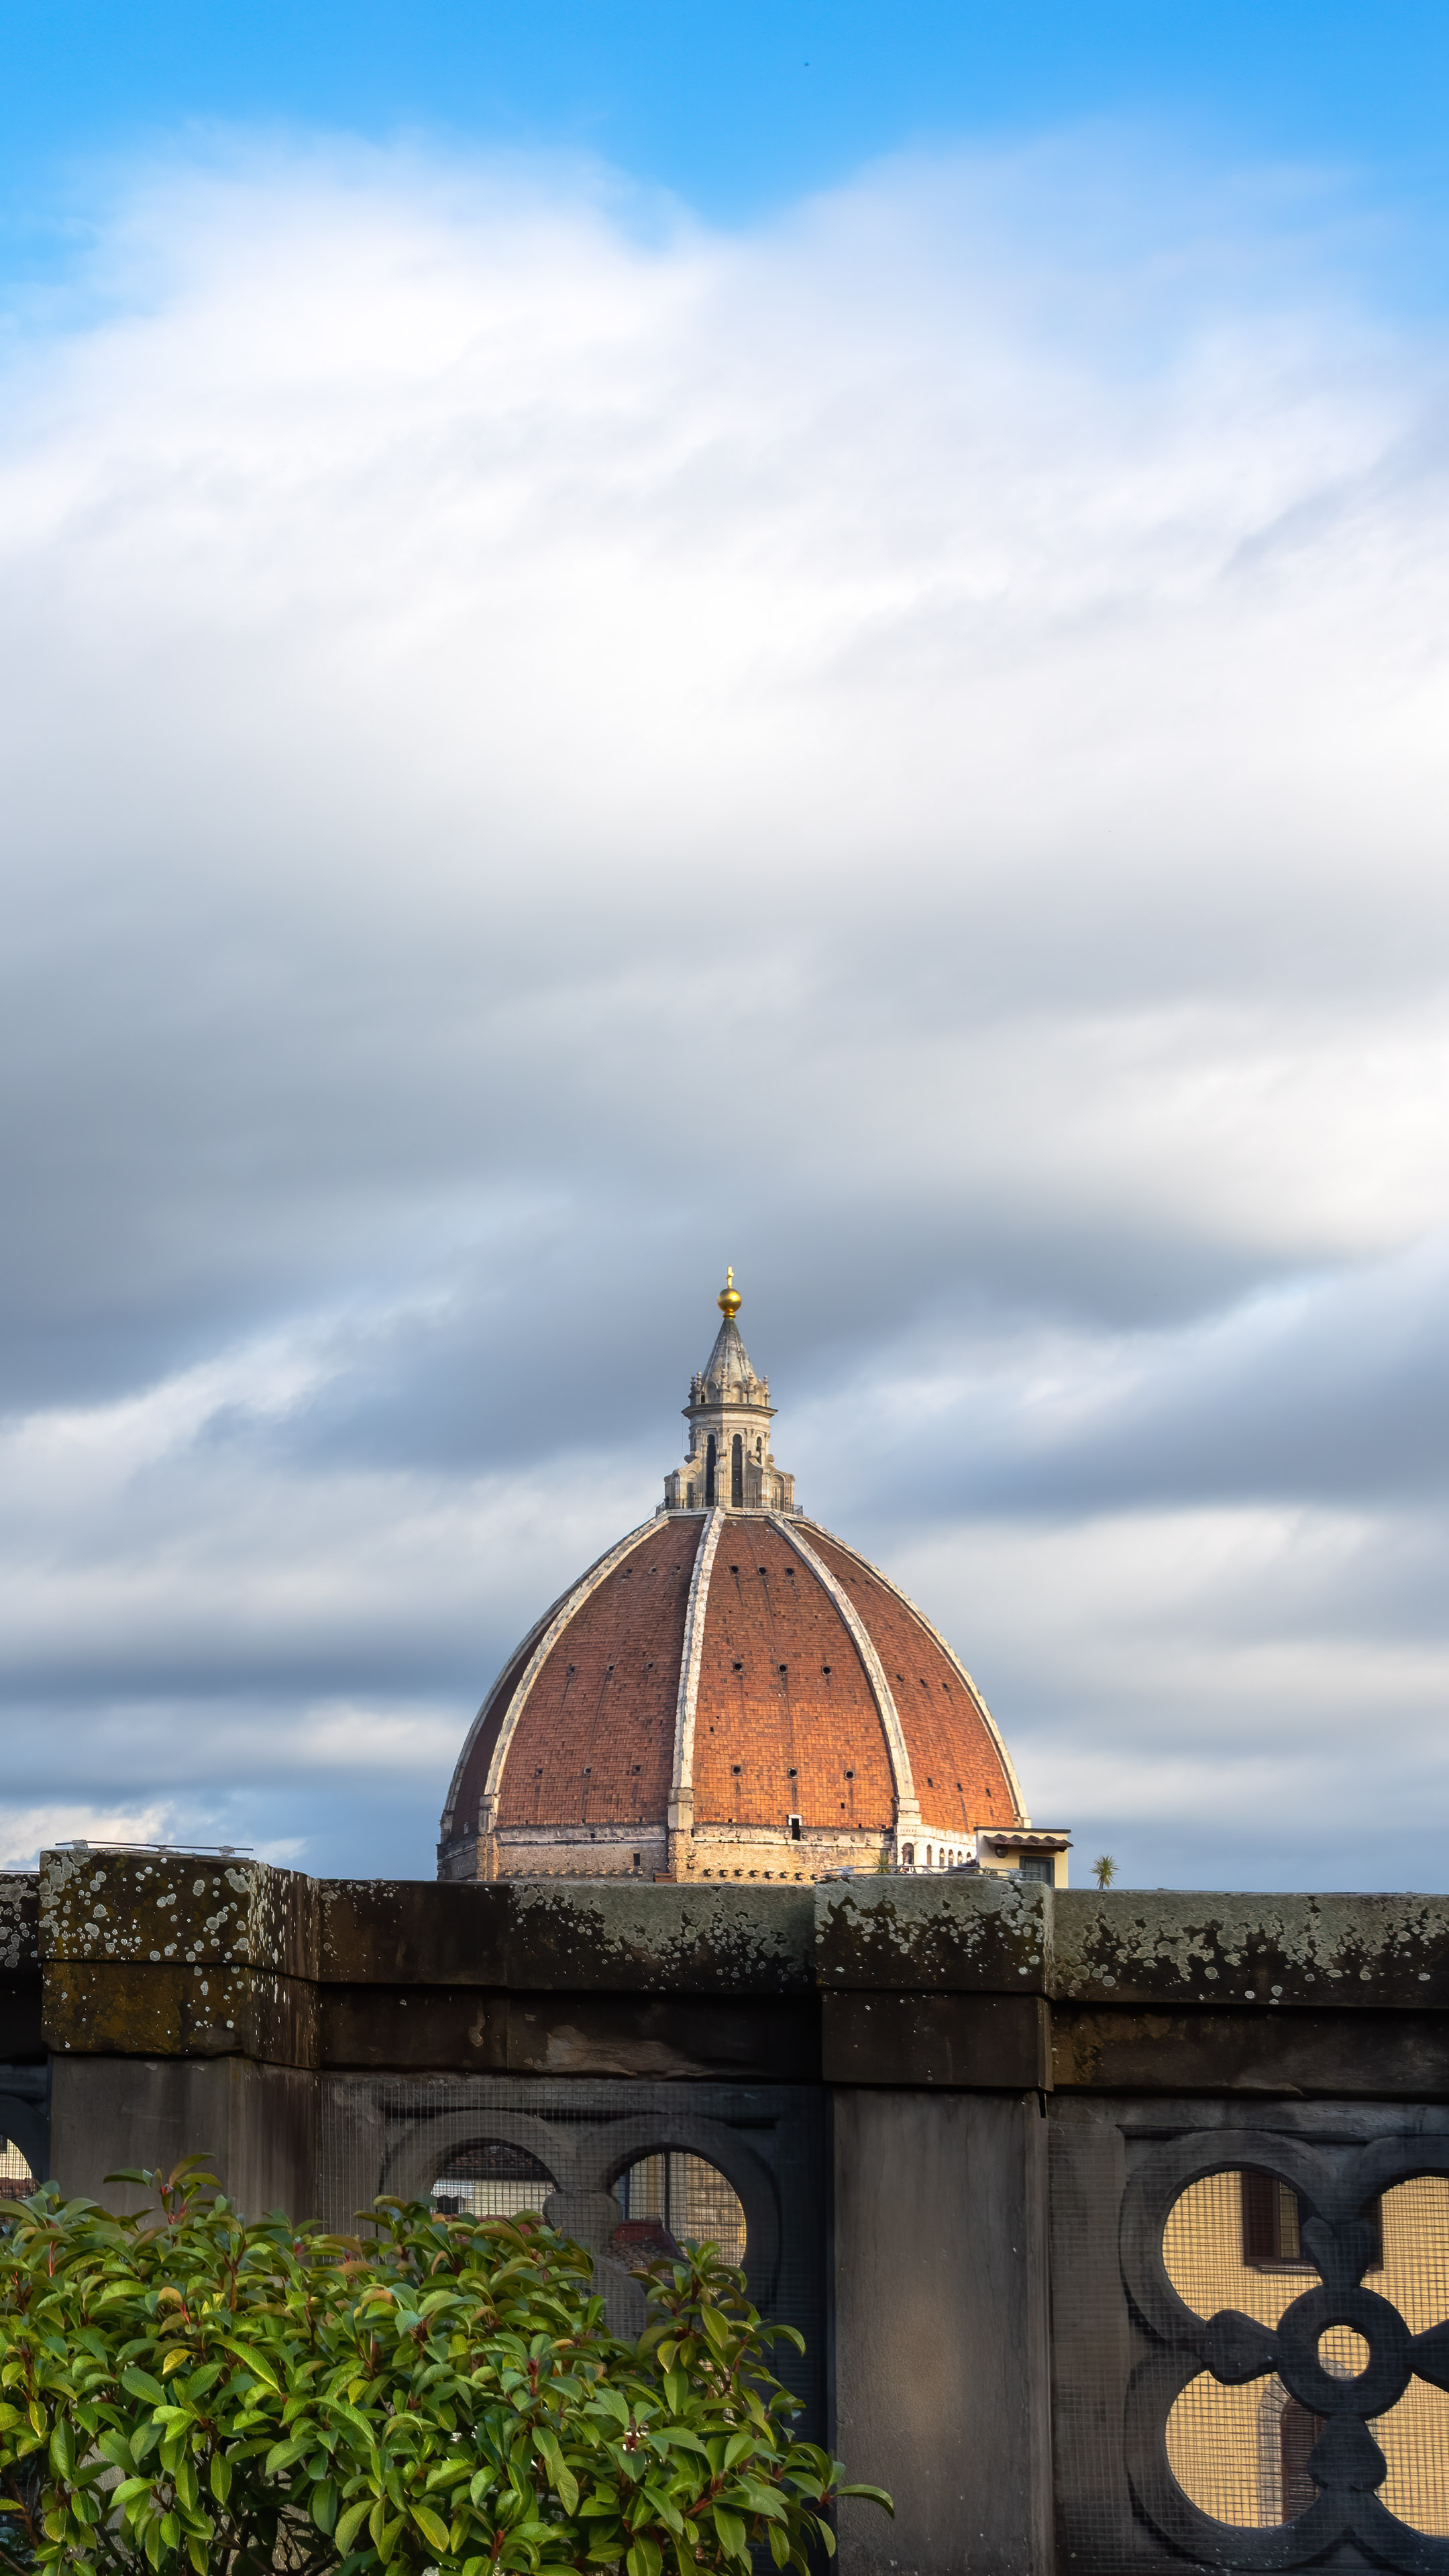 Discover the beauty of Florence with this stunning city wallpaper for your iPhone. This wallpaper captures the essence of Florence's architecture and culture, and is perfect for anyone who loves this Italian gem.